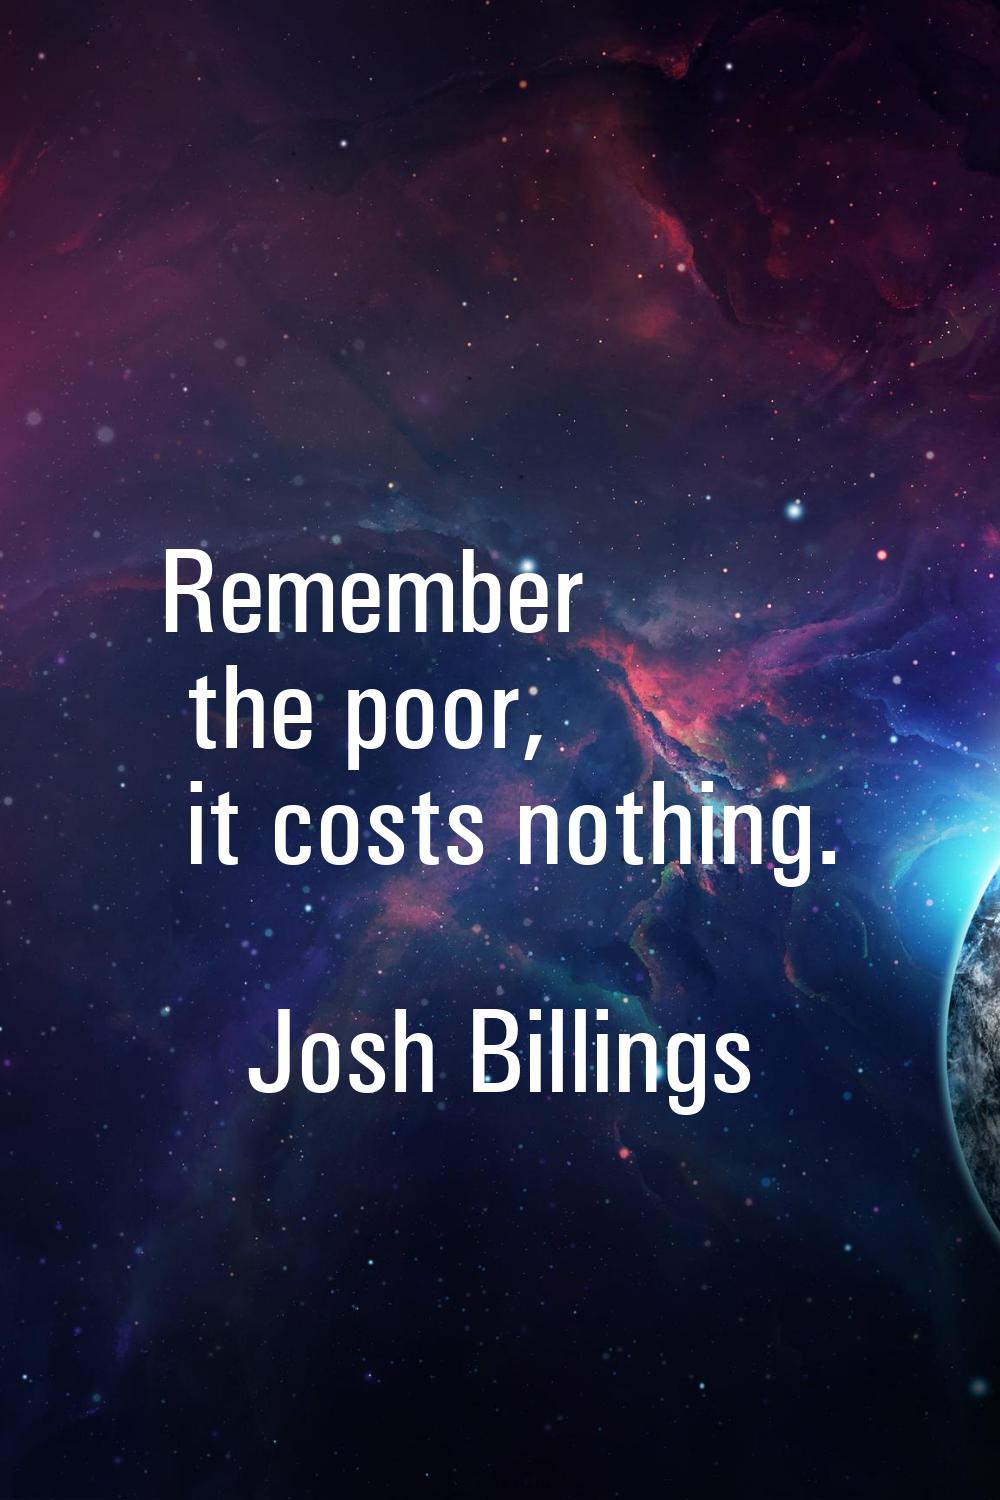 Remember the poor, it costs nothing.